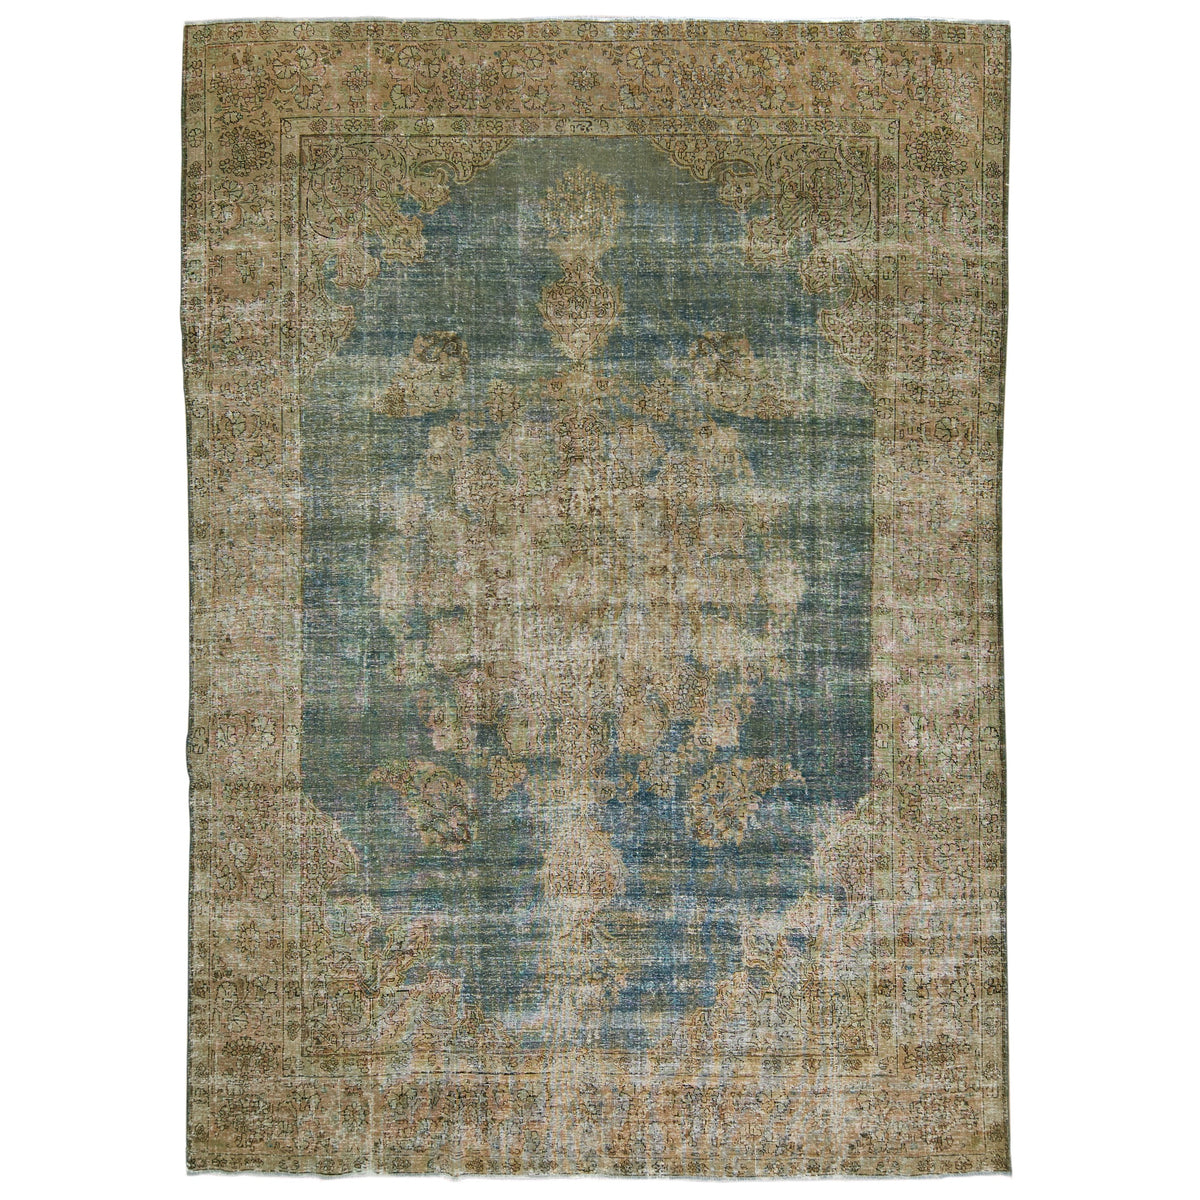 Traci - A Symphony in Blue | Kuden Rugs